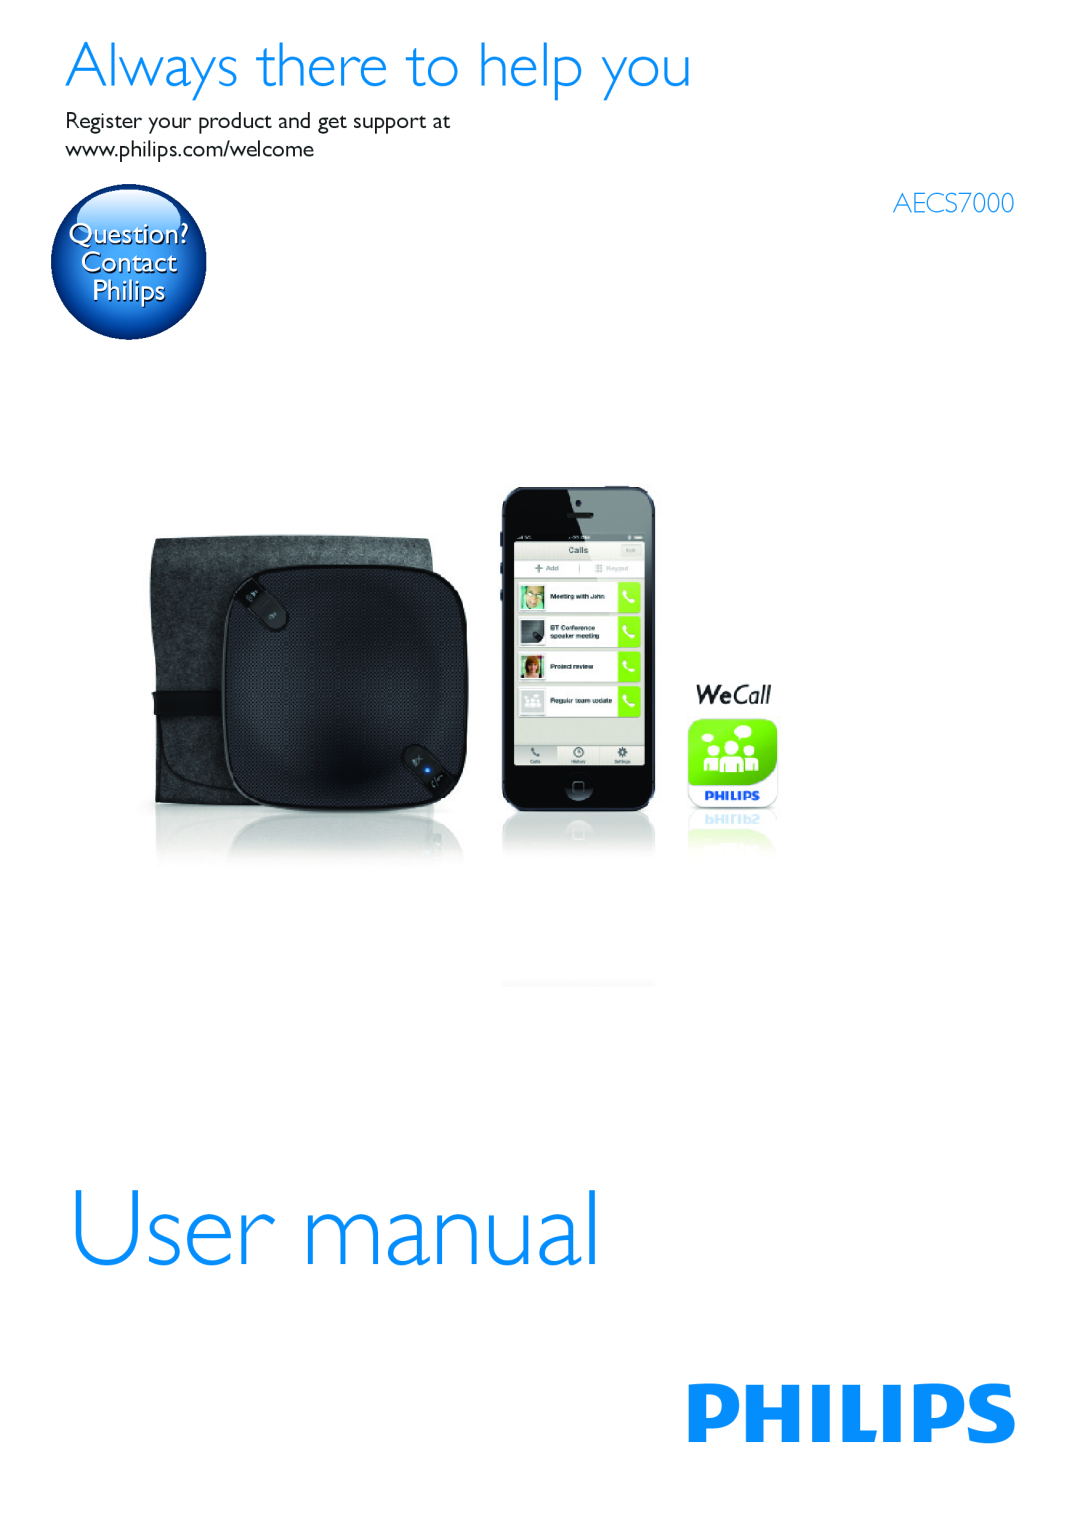 Philips AECS7000 user manual Always there to help you, Question? Contact Philips 